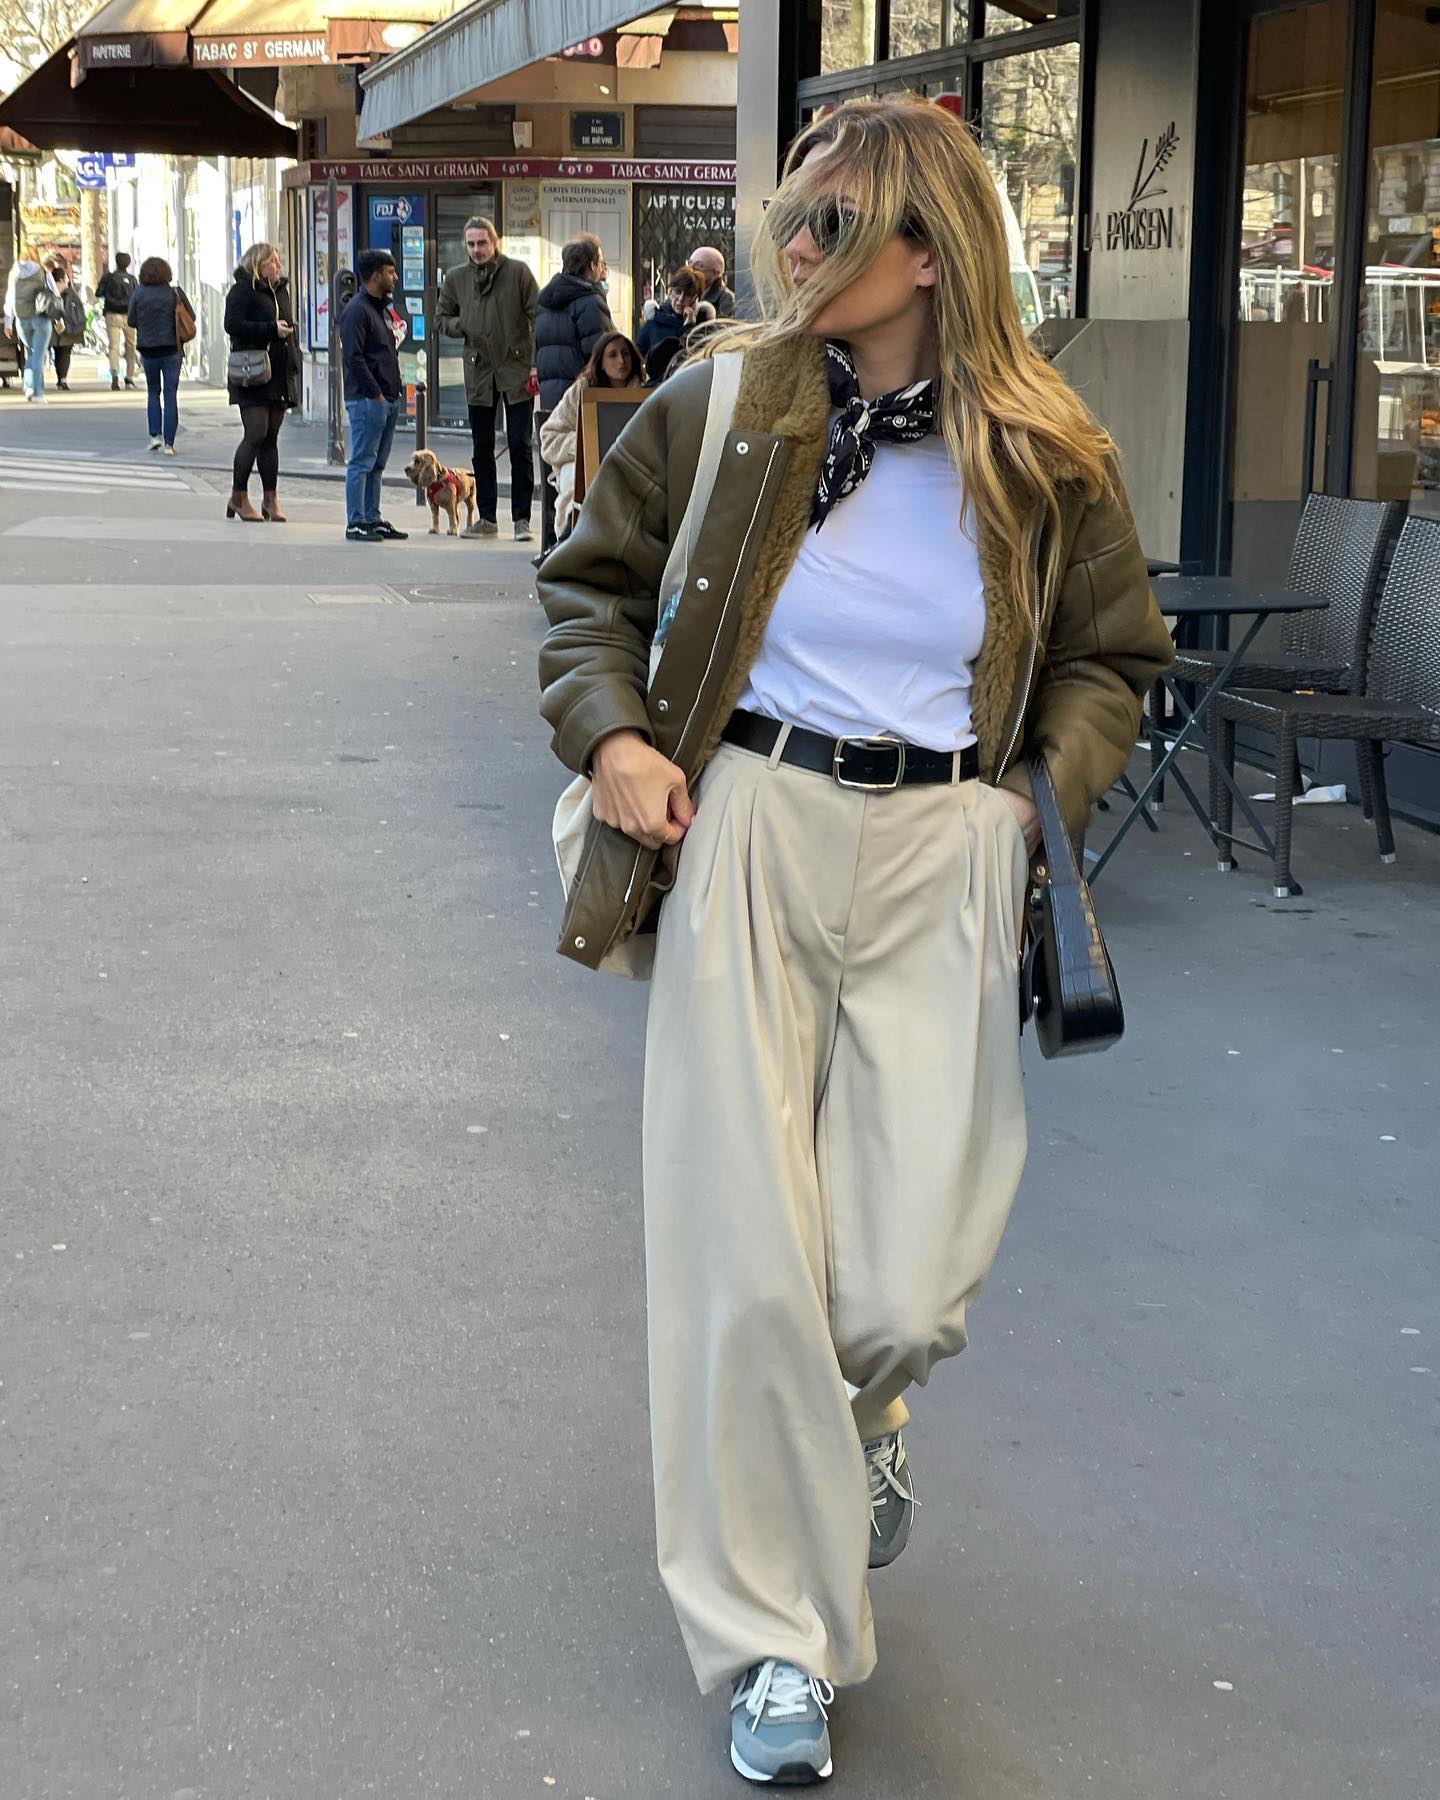 4 Items Stylish French Girls Love to Wear With Sneakers | Who What Wear